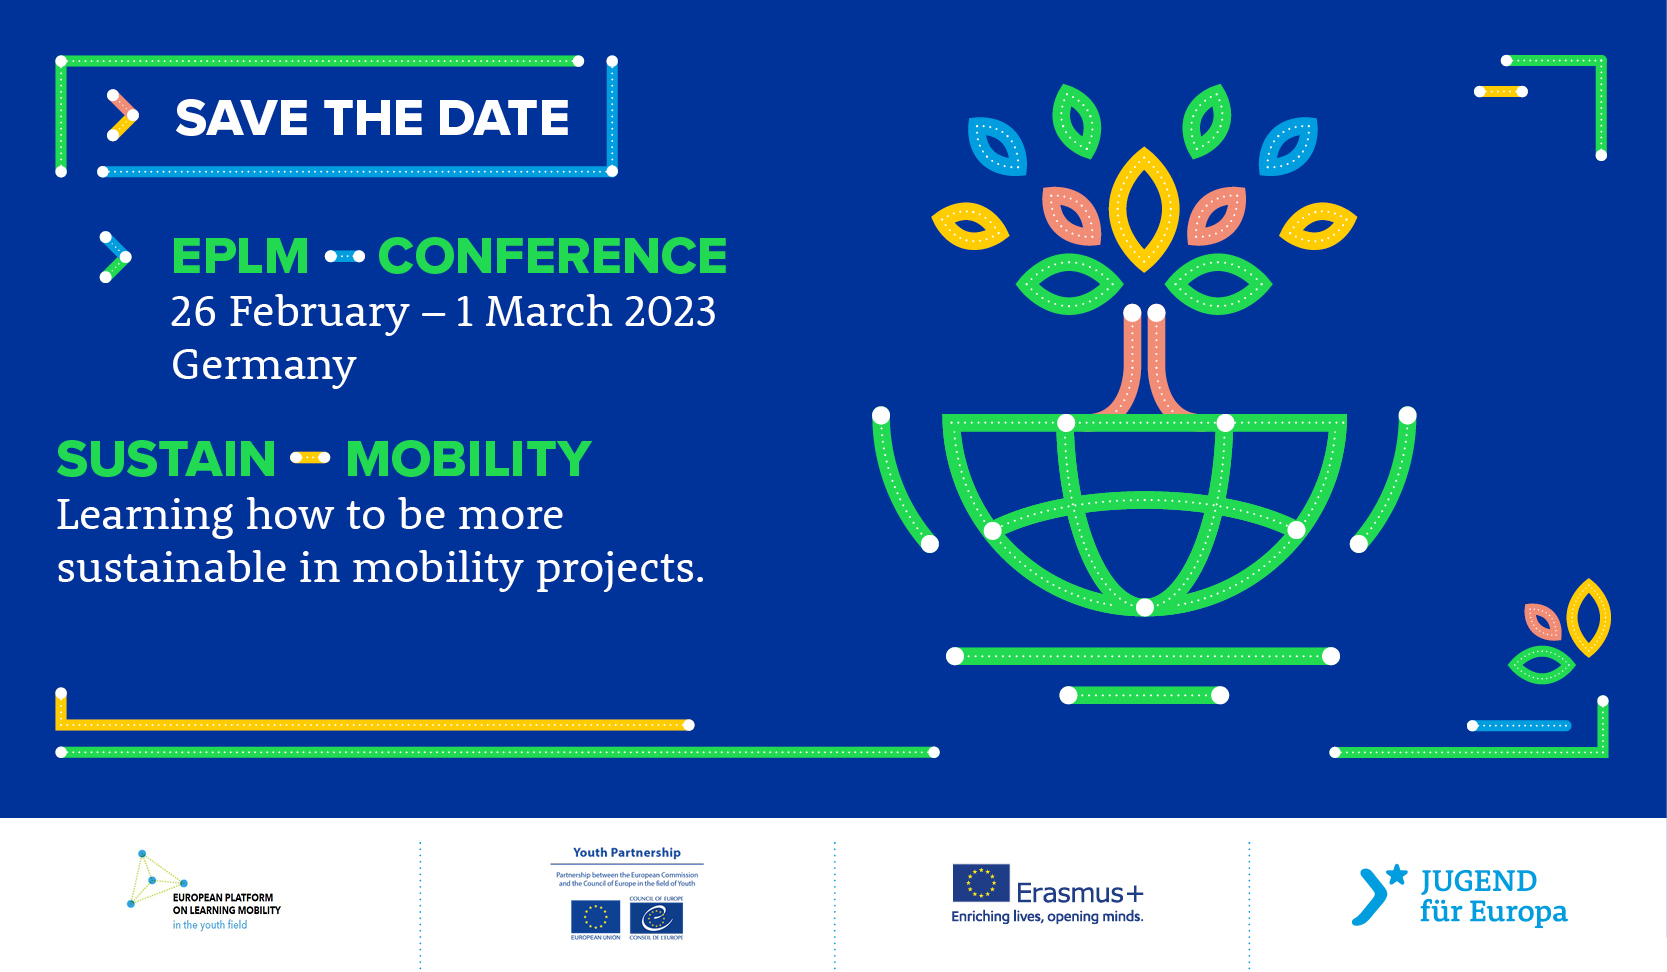 Europe on the Move - a proposal on the future of learning mobility